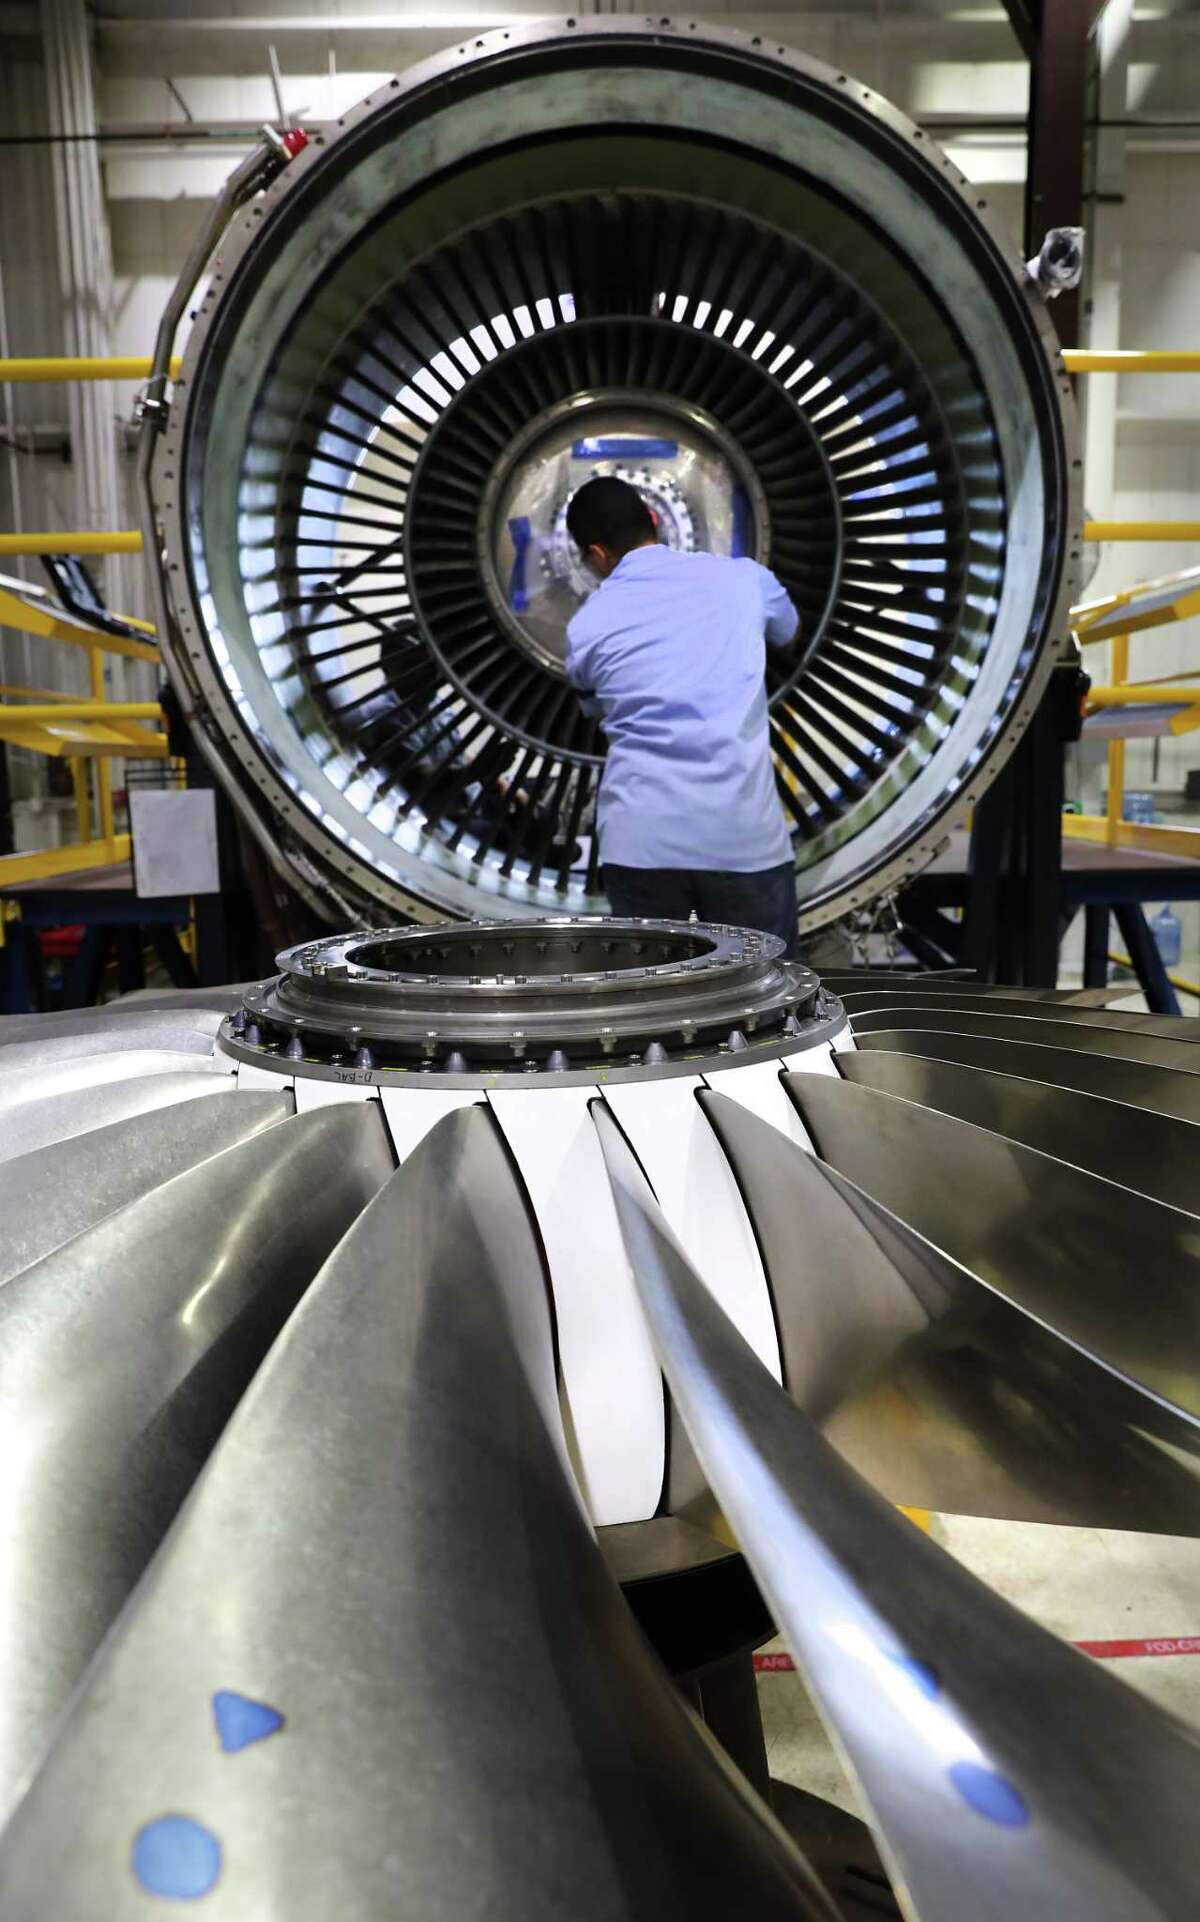 An worker at StandardAero disassembles a RB211 jet engine from a Boeing 757. The company, which is located at Port San Antonio, manufactures and refurbishes airline engines.